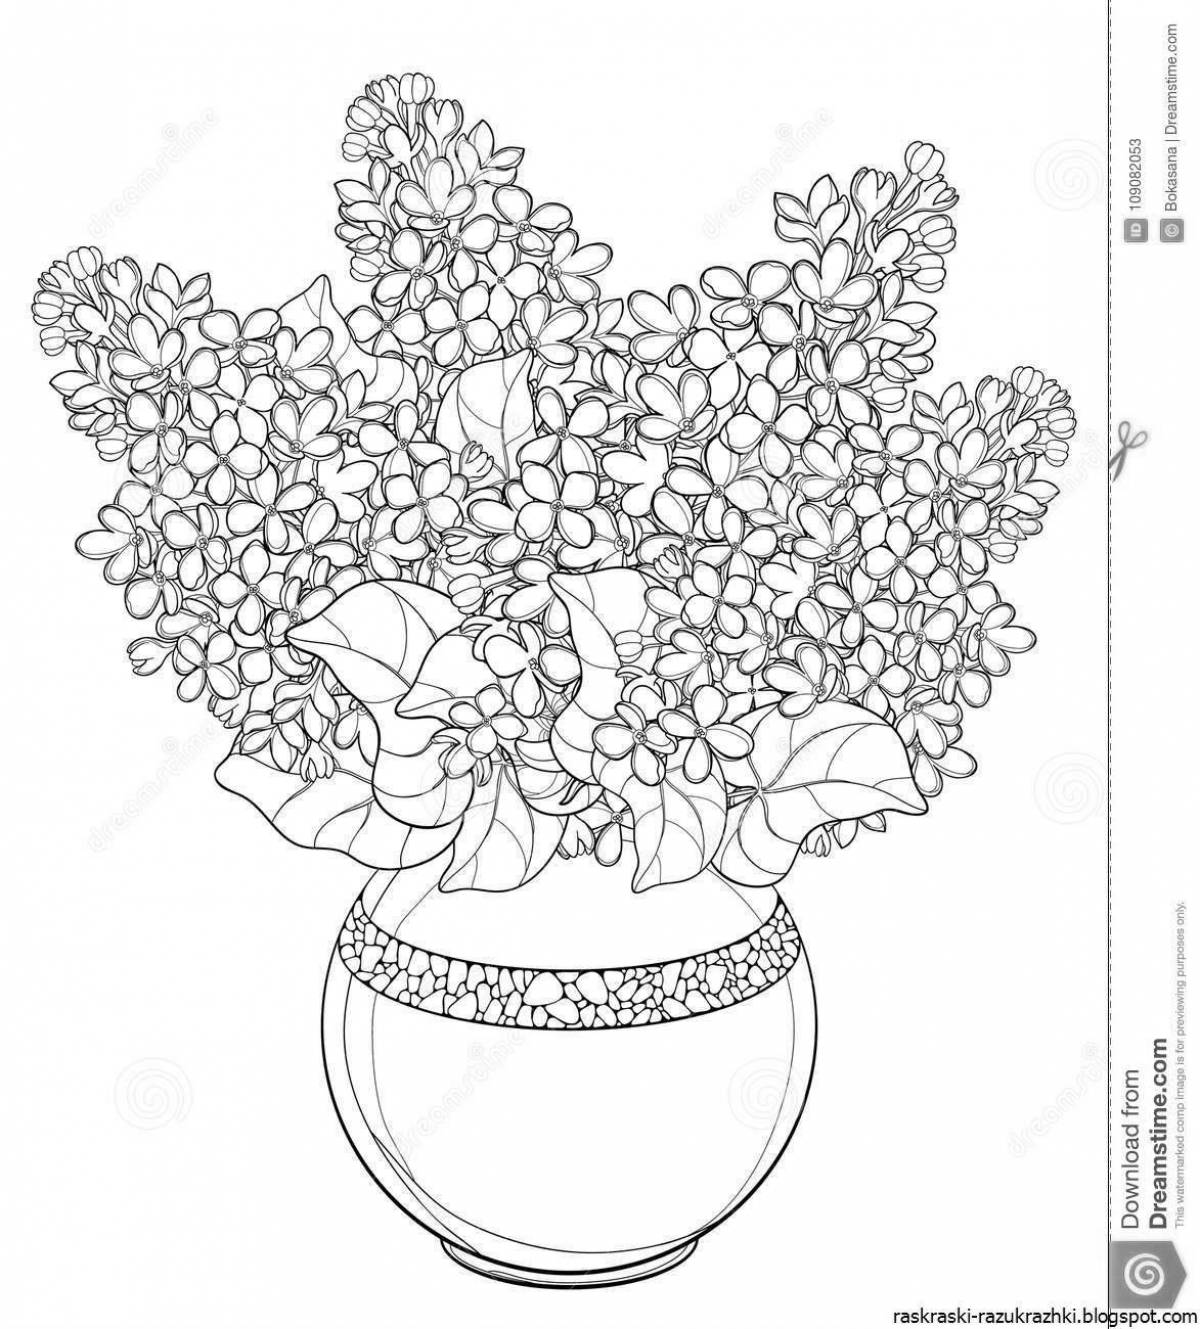 Bright bouquet in a vase coloring book